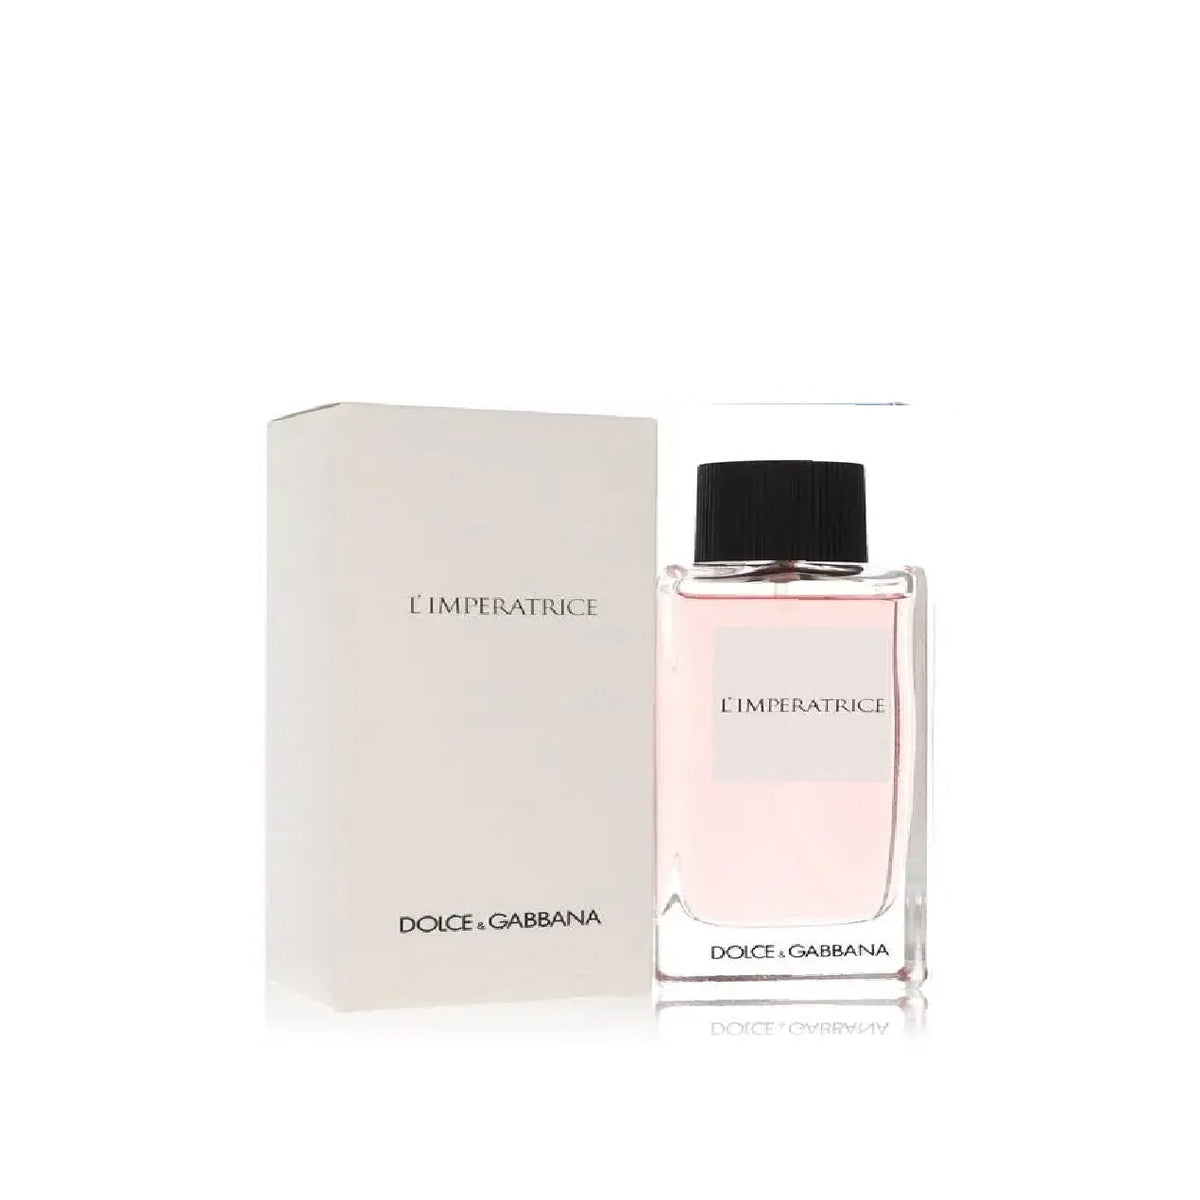 Dolce & Gabbana L'imperatrice 3 Perfume for Women